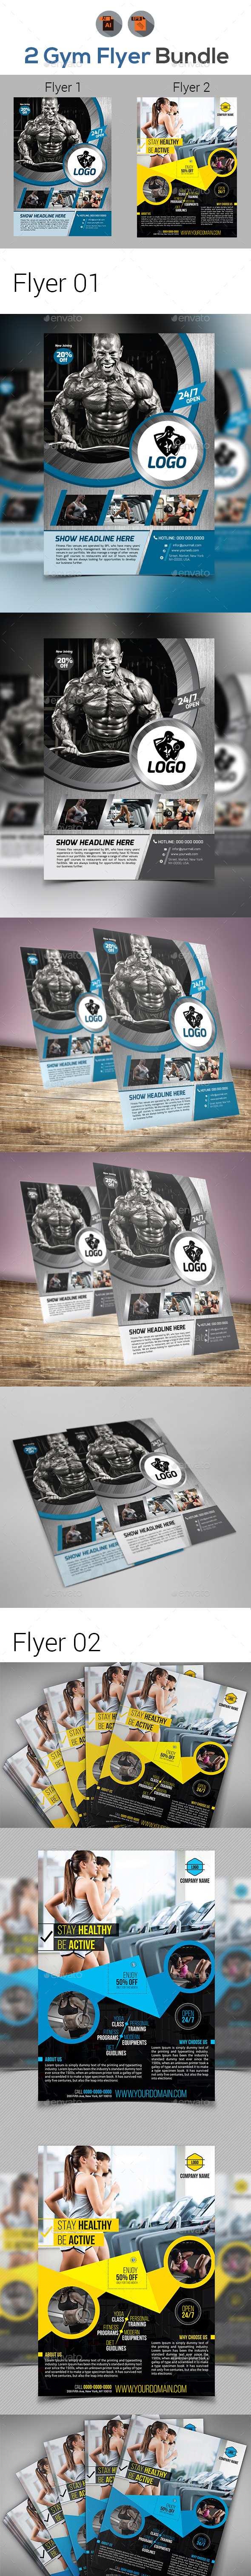 Fitness & Gym Flyers Templates